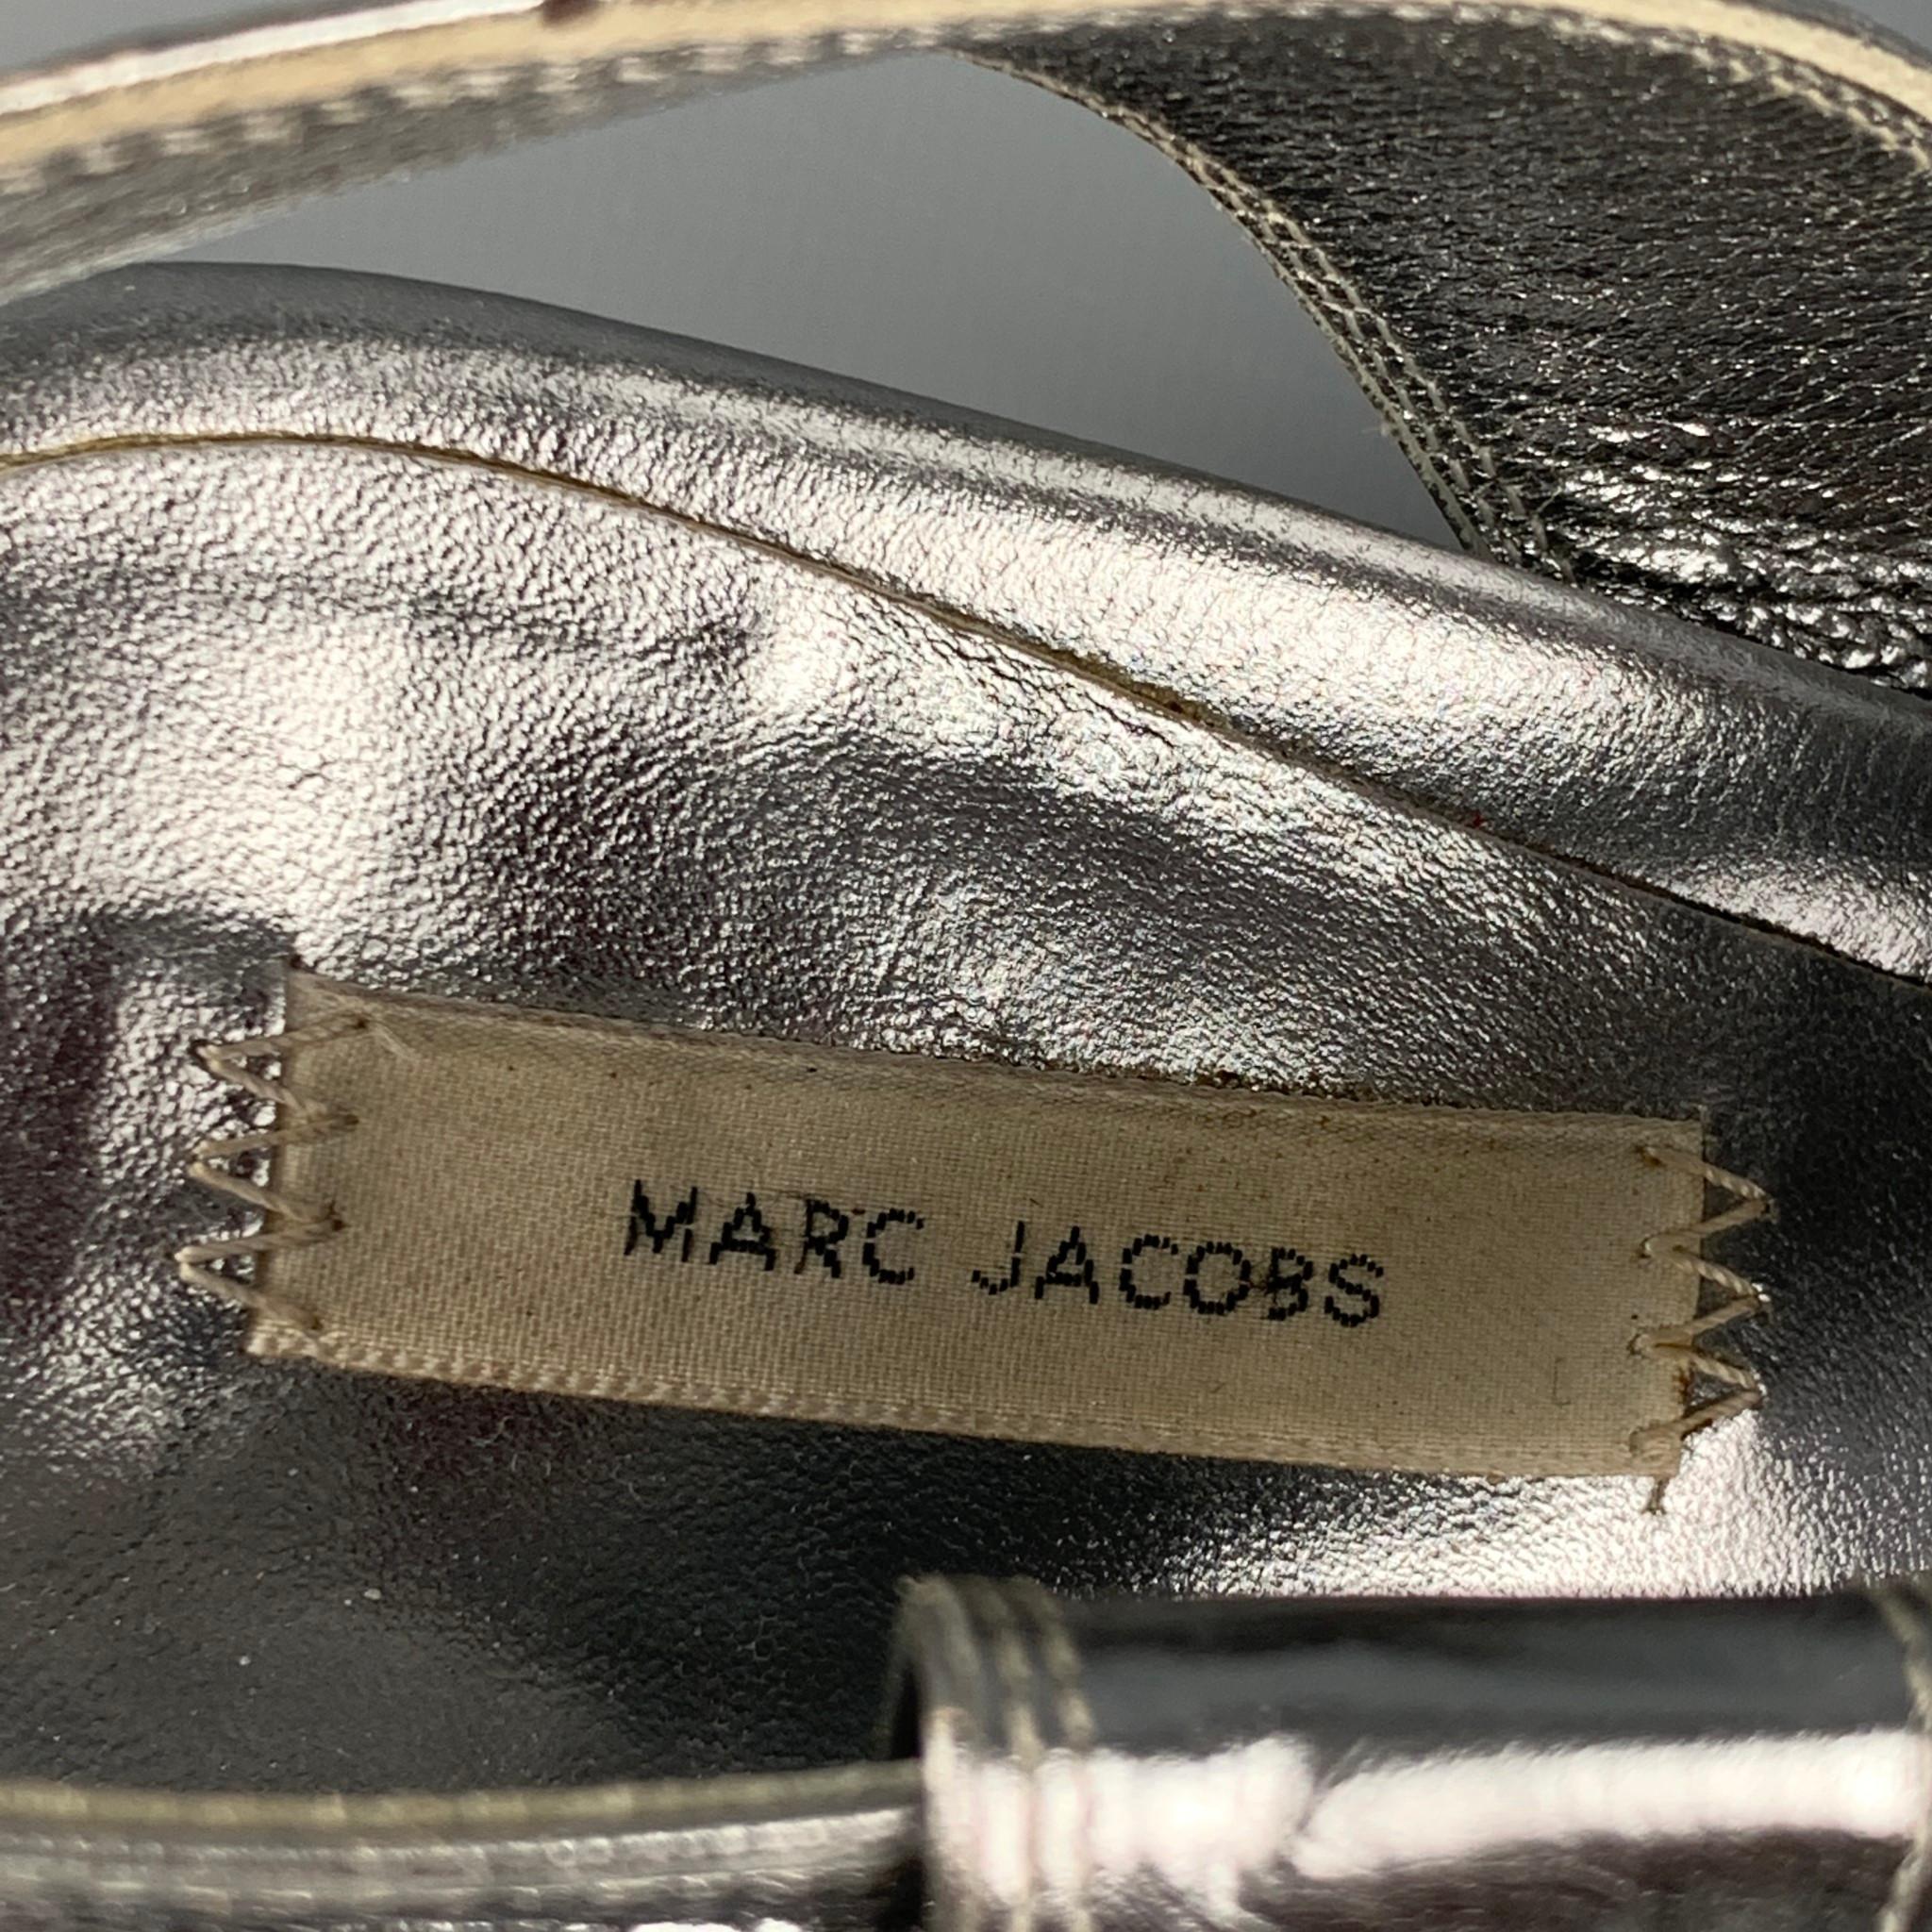 Women's MARC JACOBS Size 7 Silver Leather Wedge Nickel Sandals